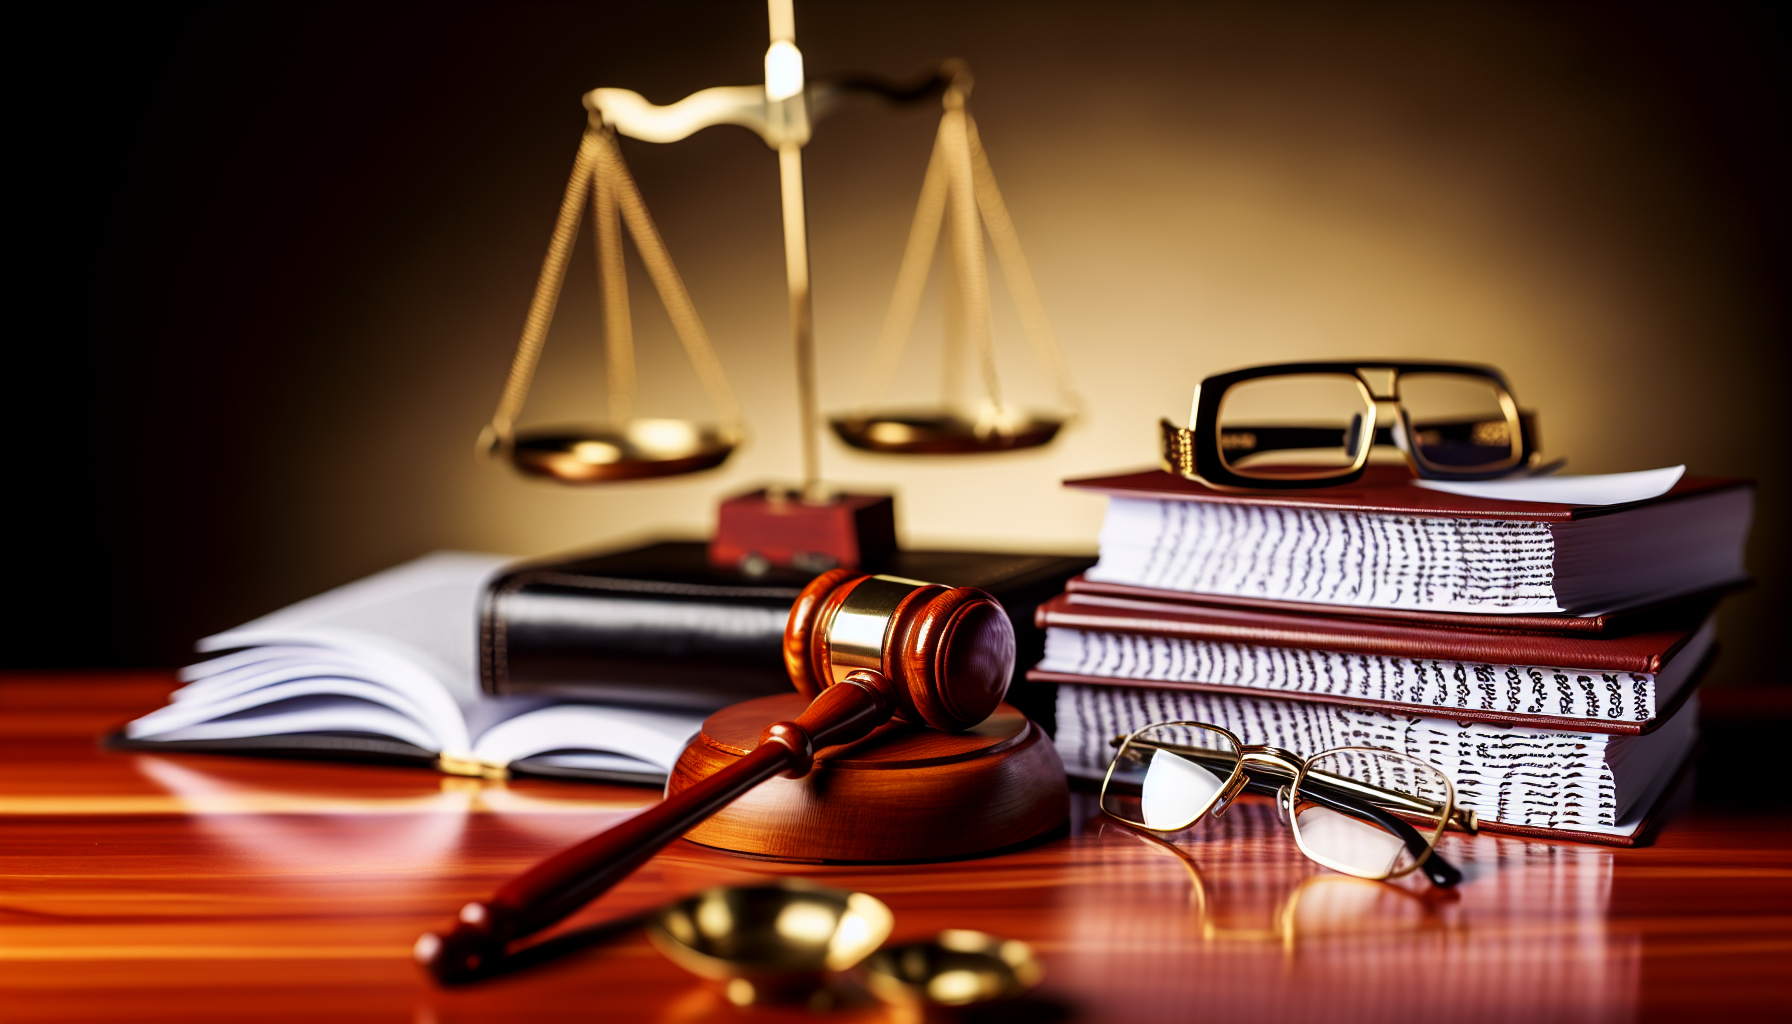 Legal documents and gavel on a desk